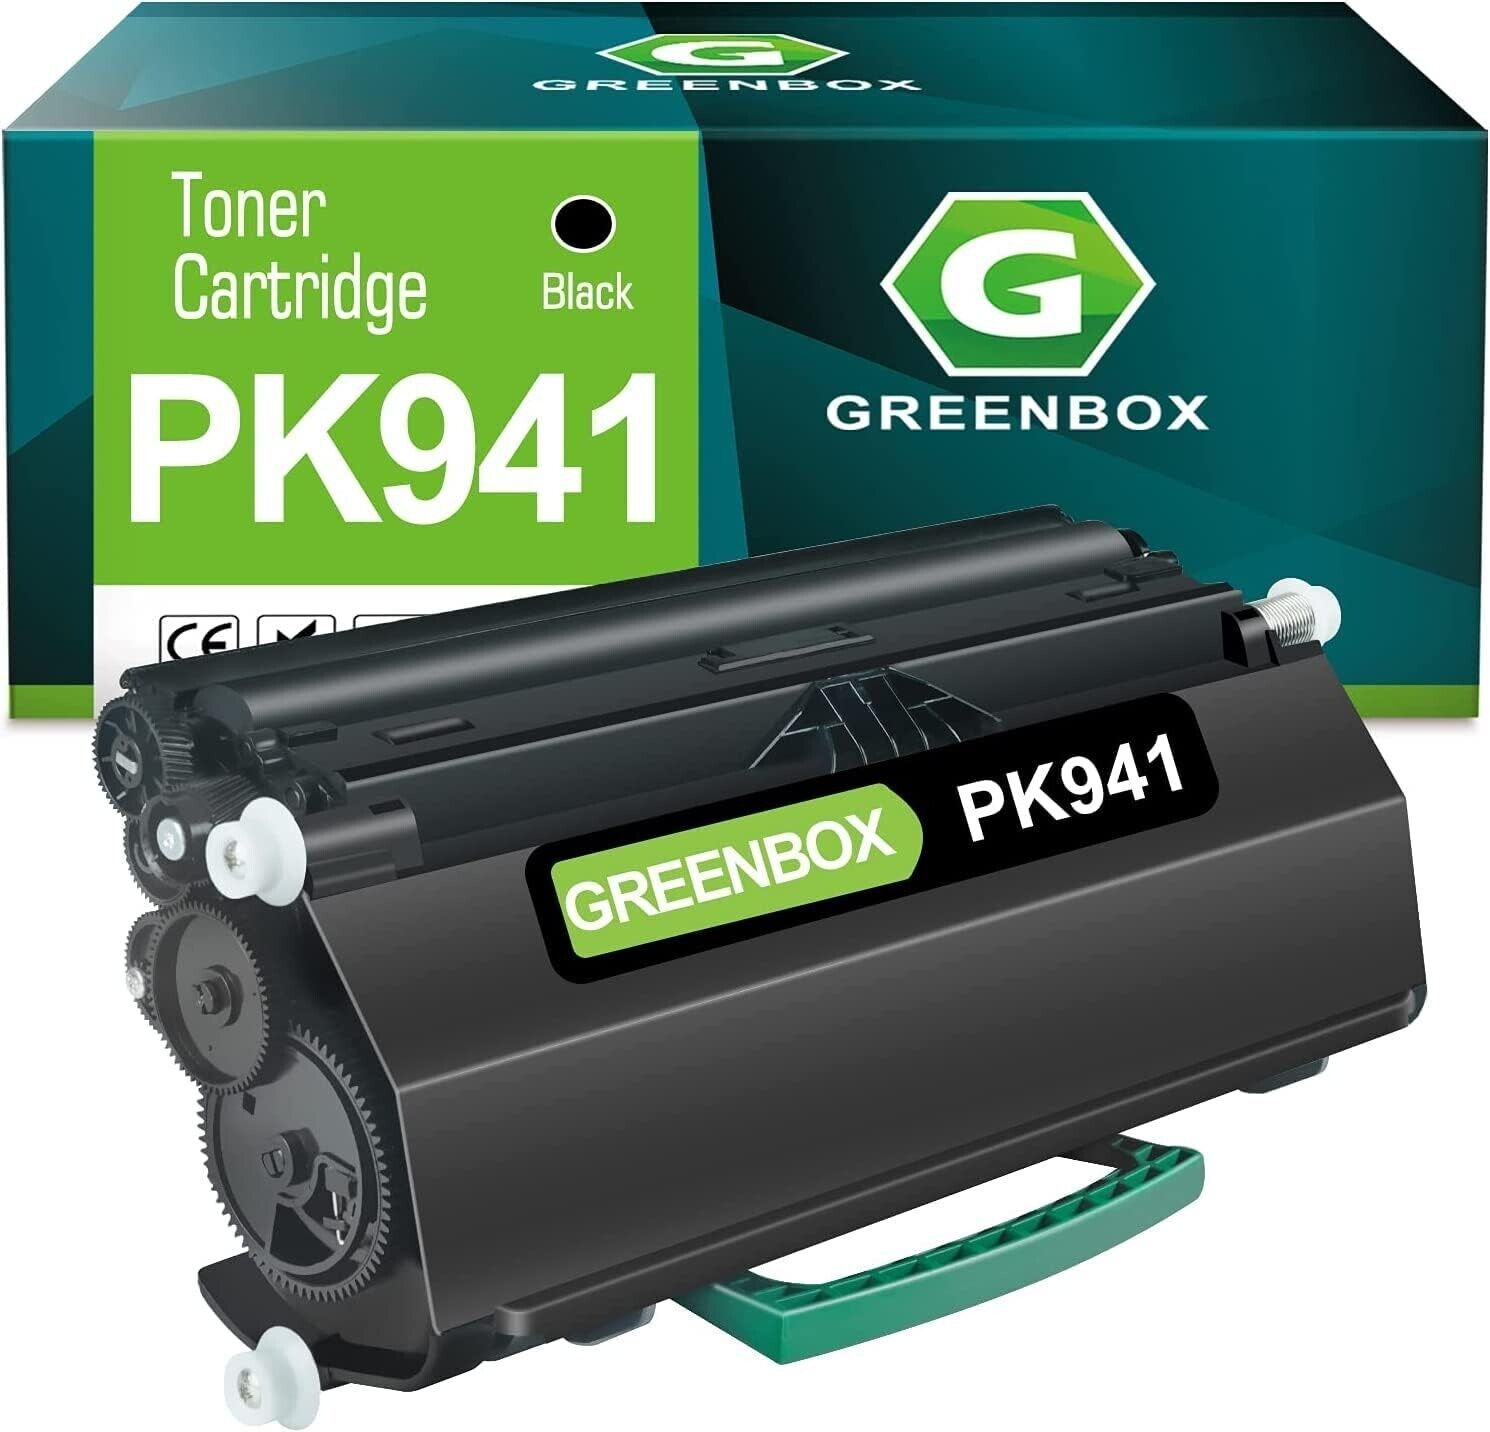 GREENBOX Compatible 2330DN Toner Cartridge Replacement for Dell PK941 6,000 Page